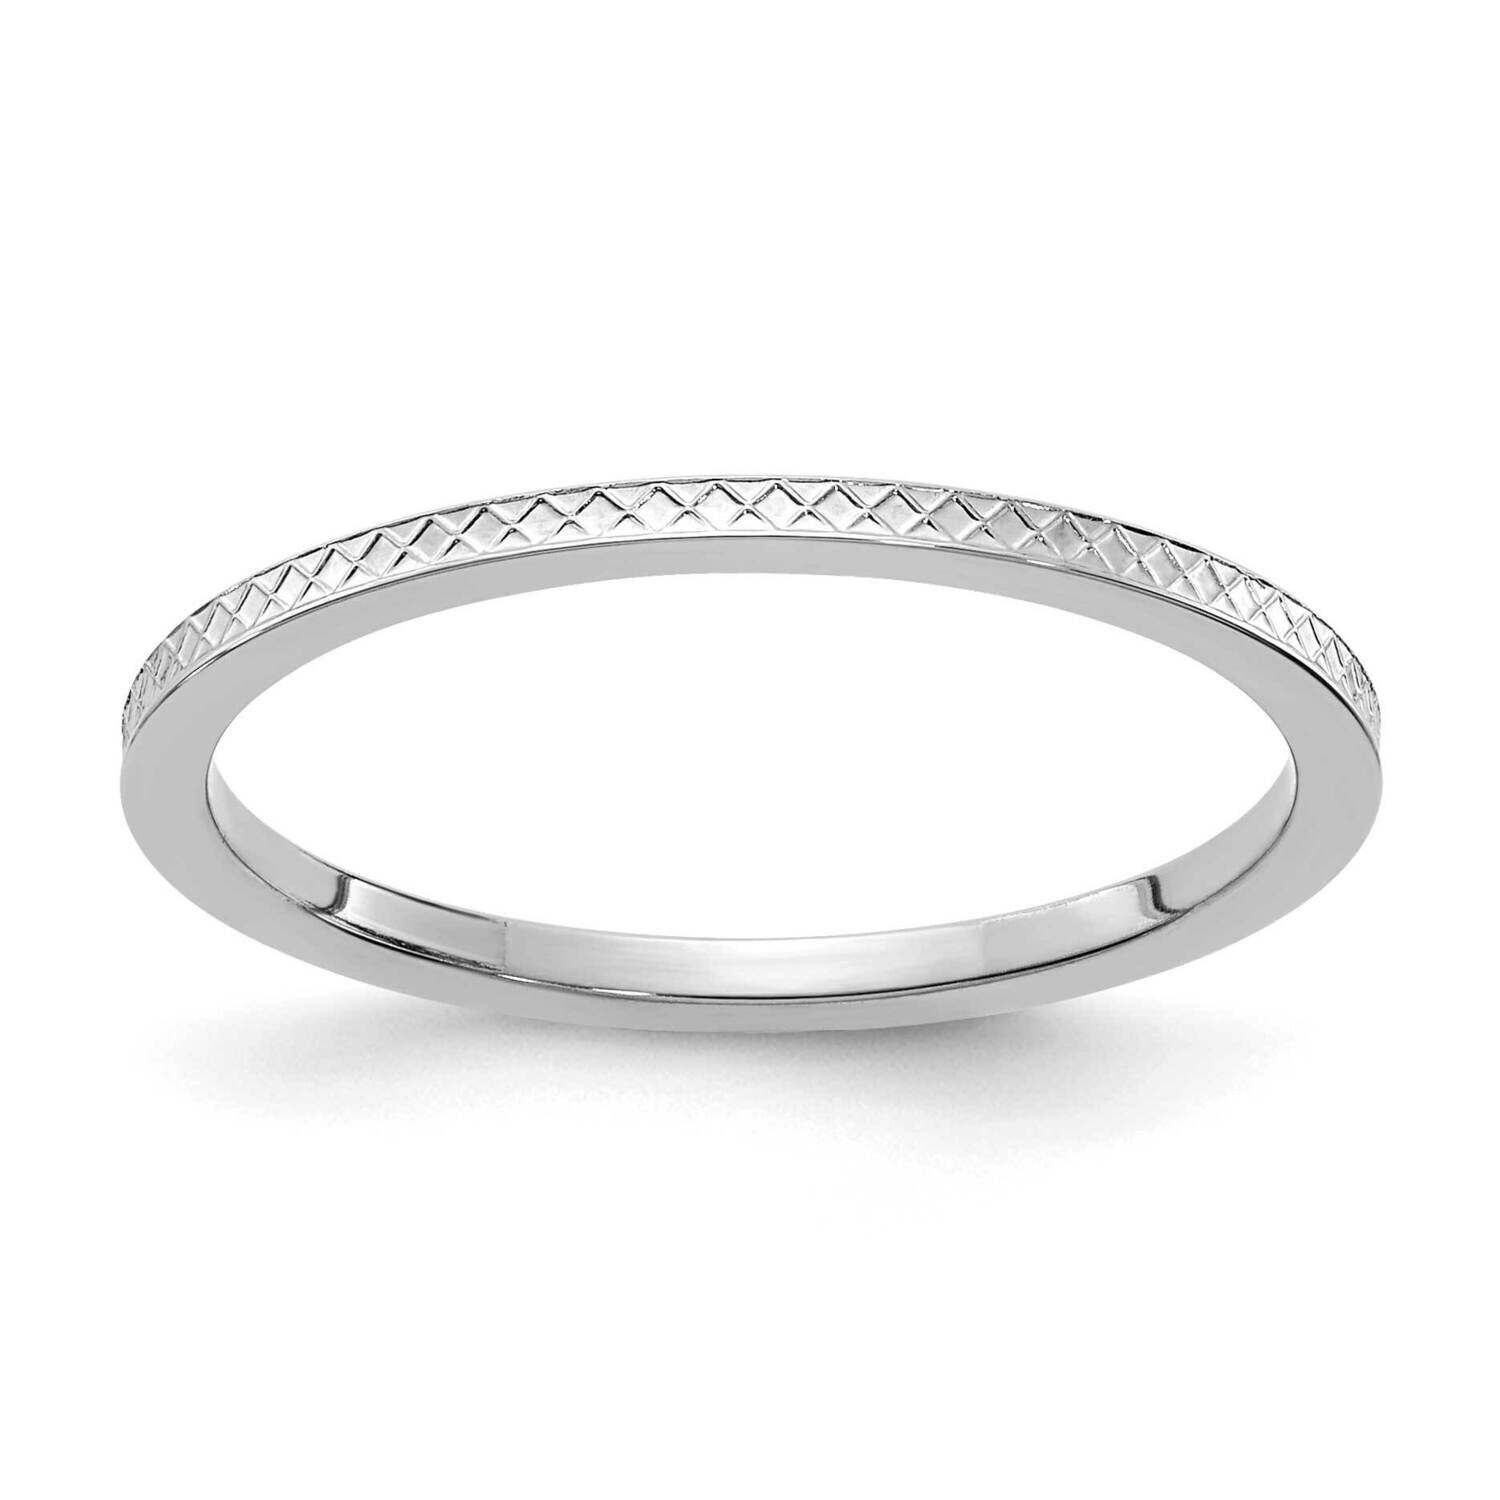 1.2mm Criss-Cross Pattern Stackable Band 14k White Gold STK20-120W